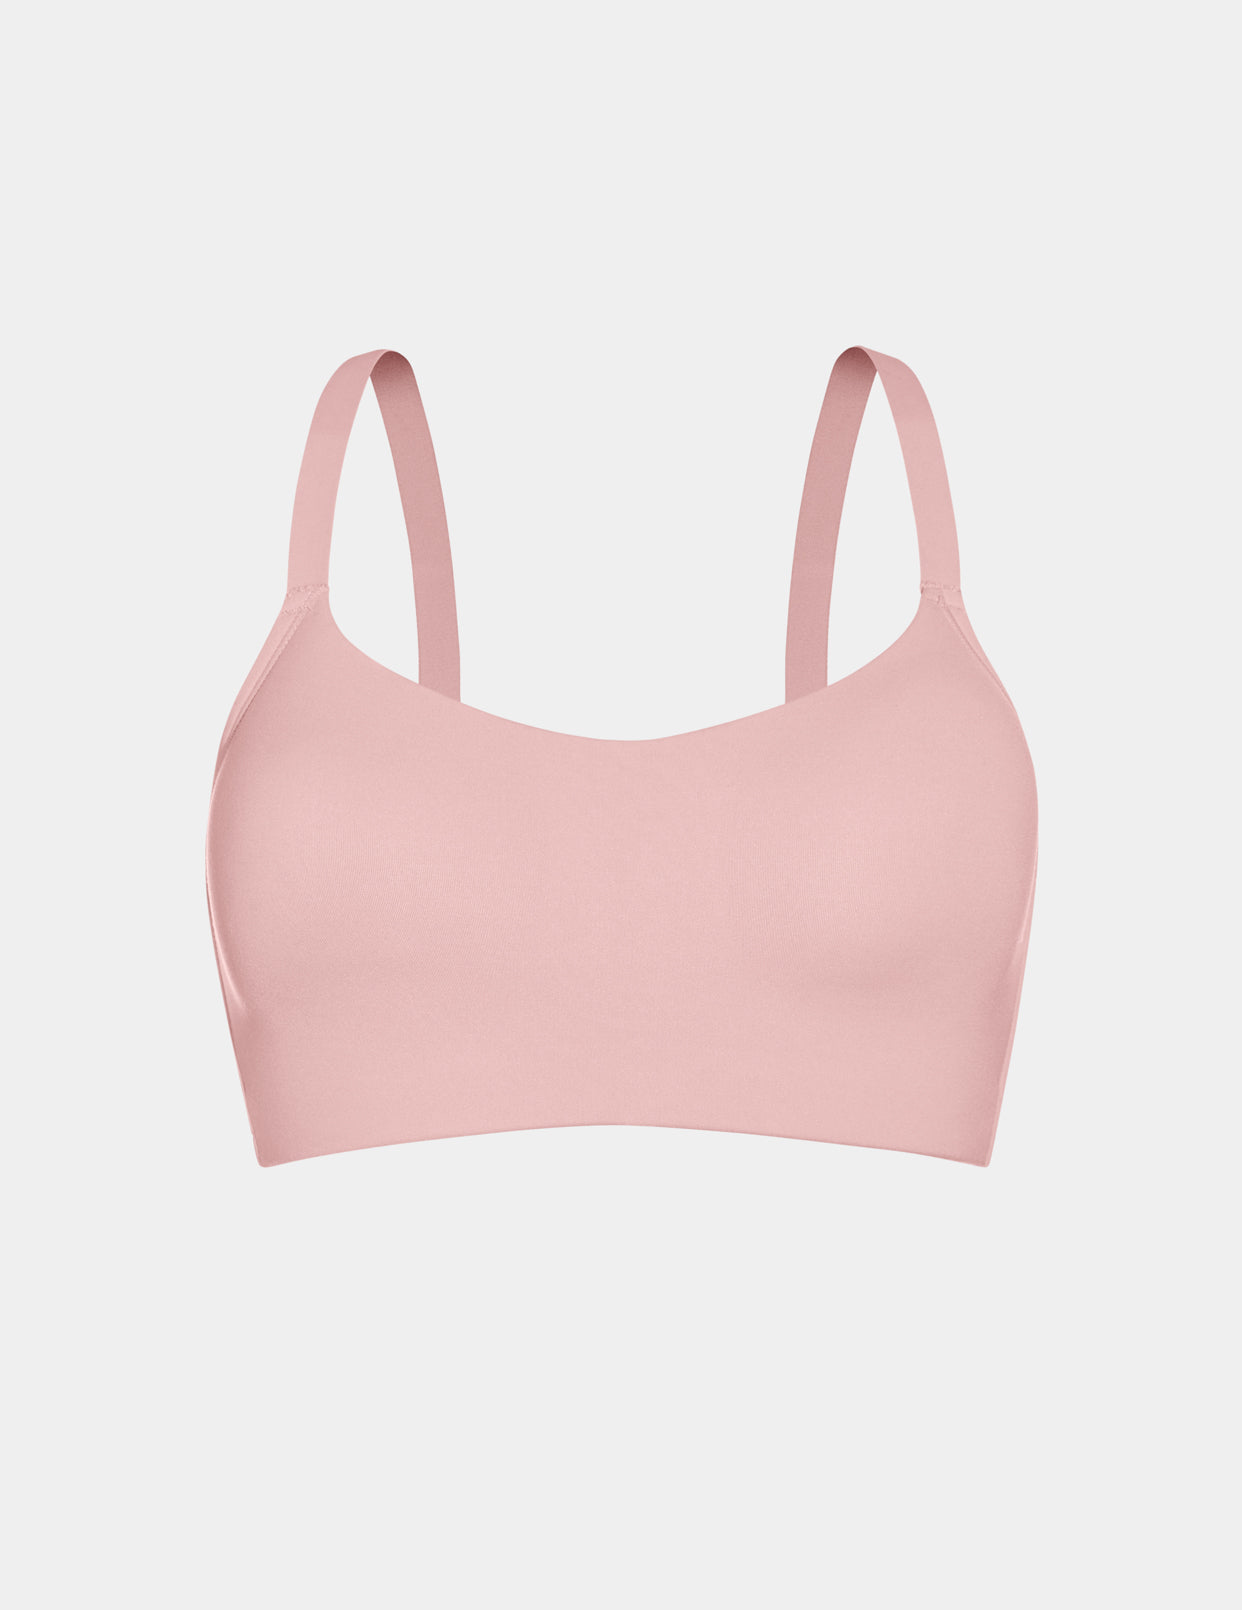 Discover Ultimate Comfort with Knix's Newest Everyday Bra: The One